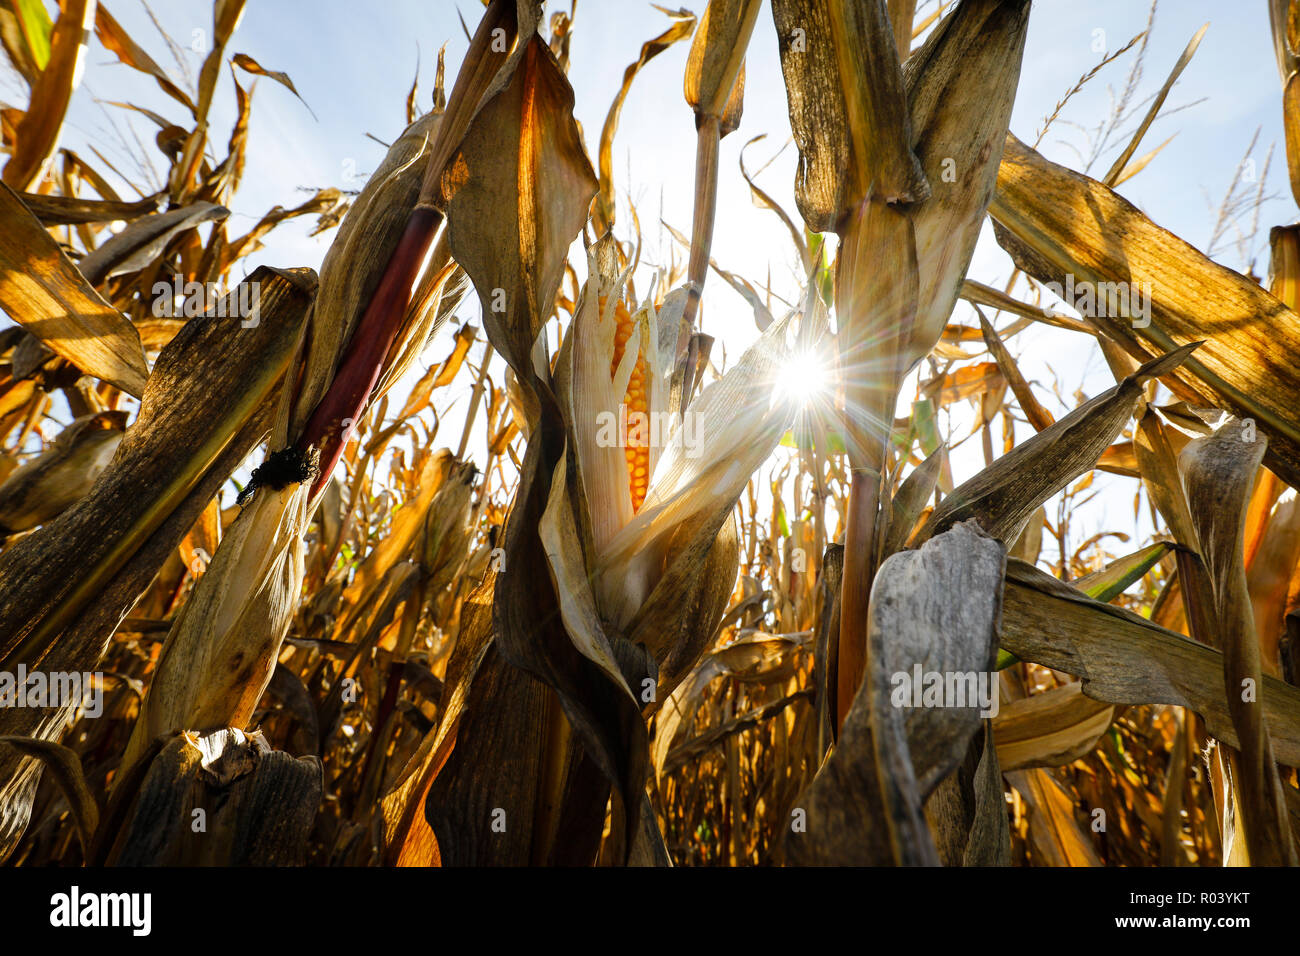 Maize field in hot summer, Germany Stock Photo